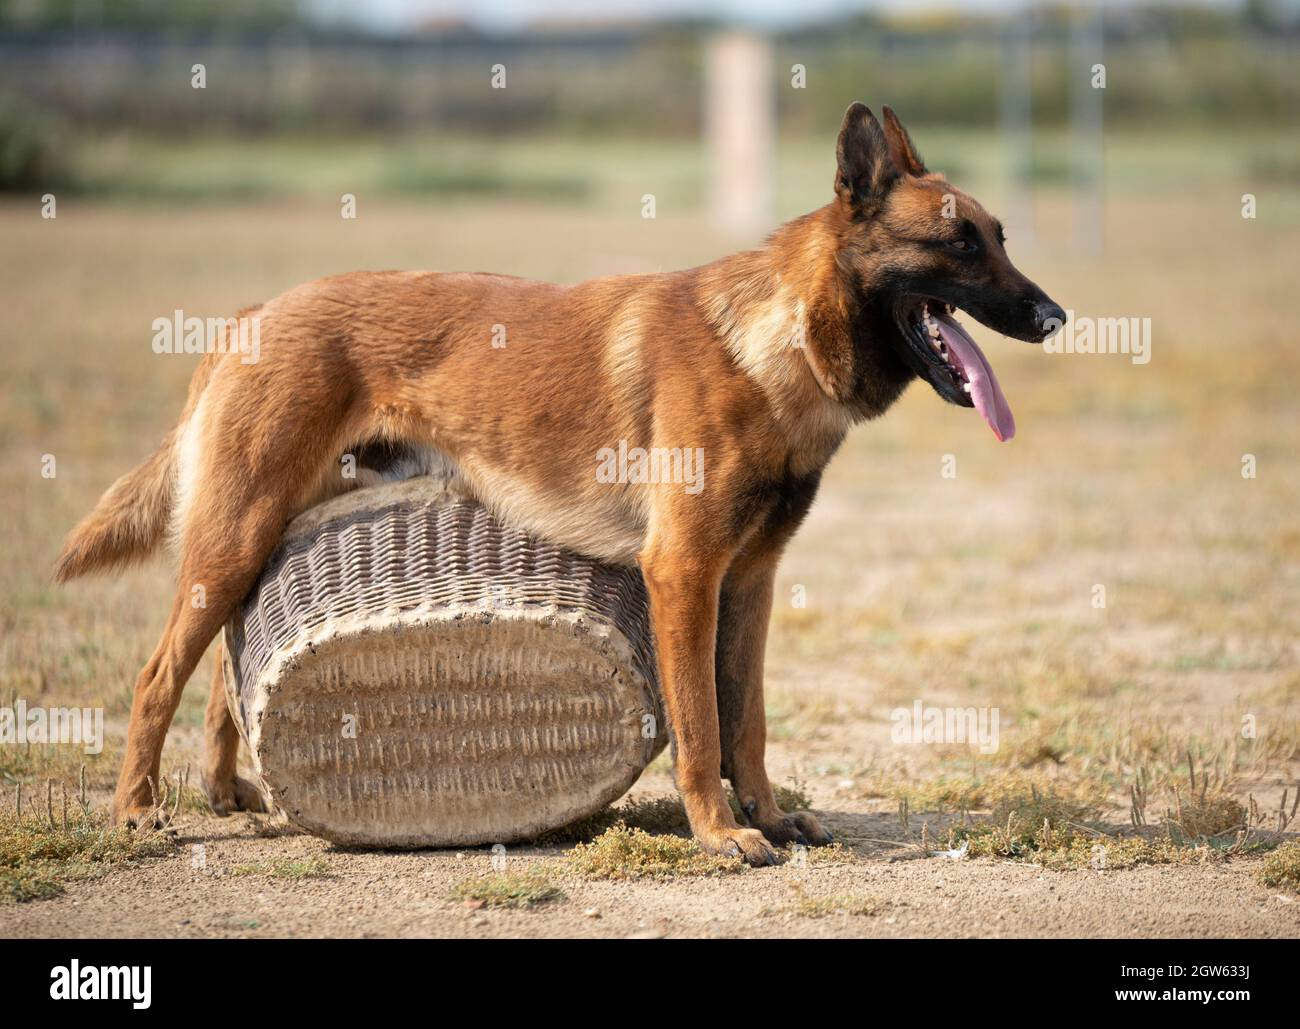 Side View Of Brown Dog With Basket On Land Stock Photo